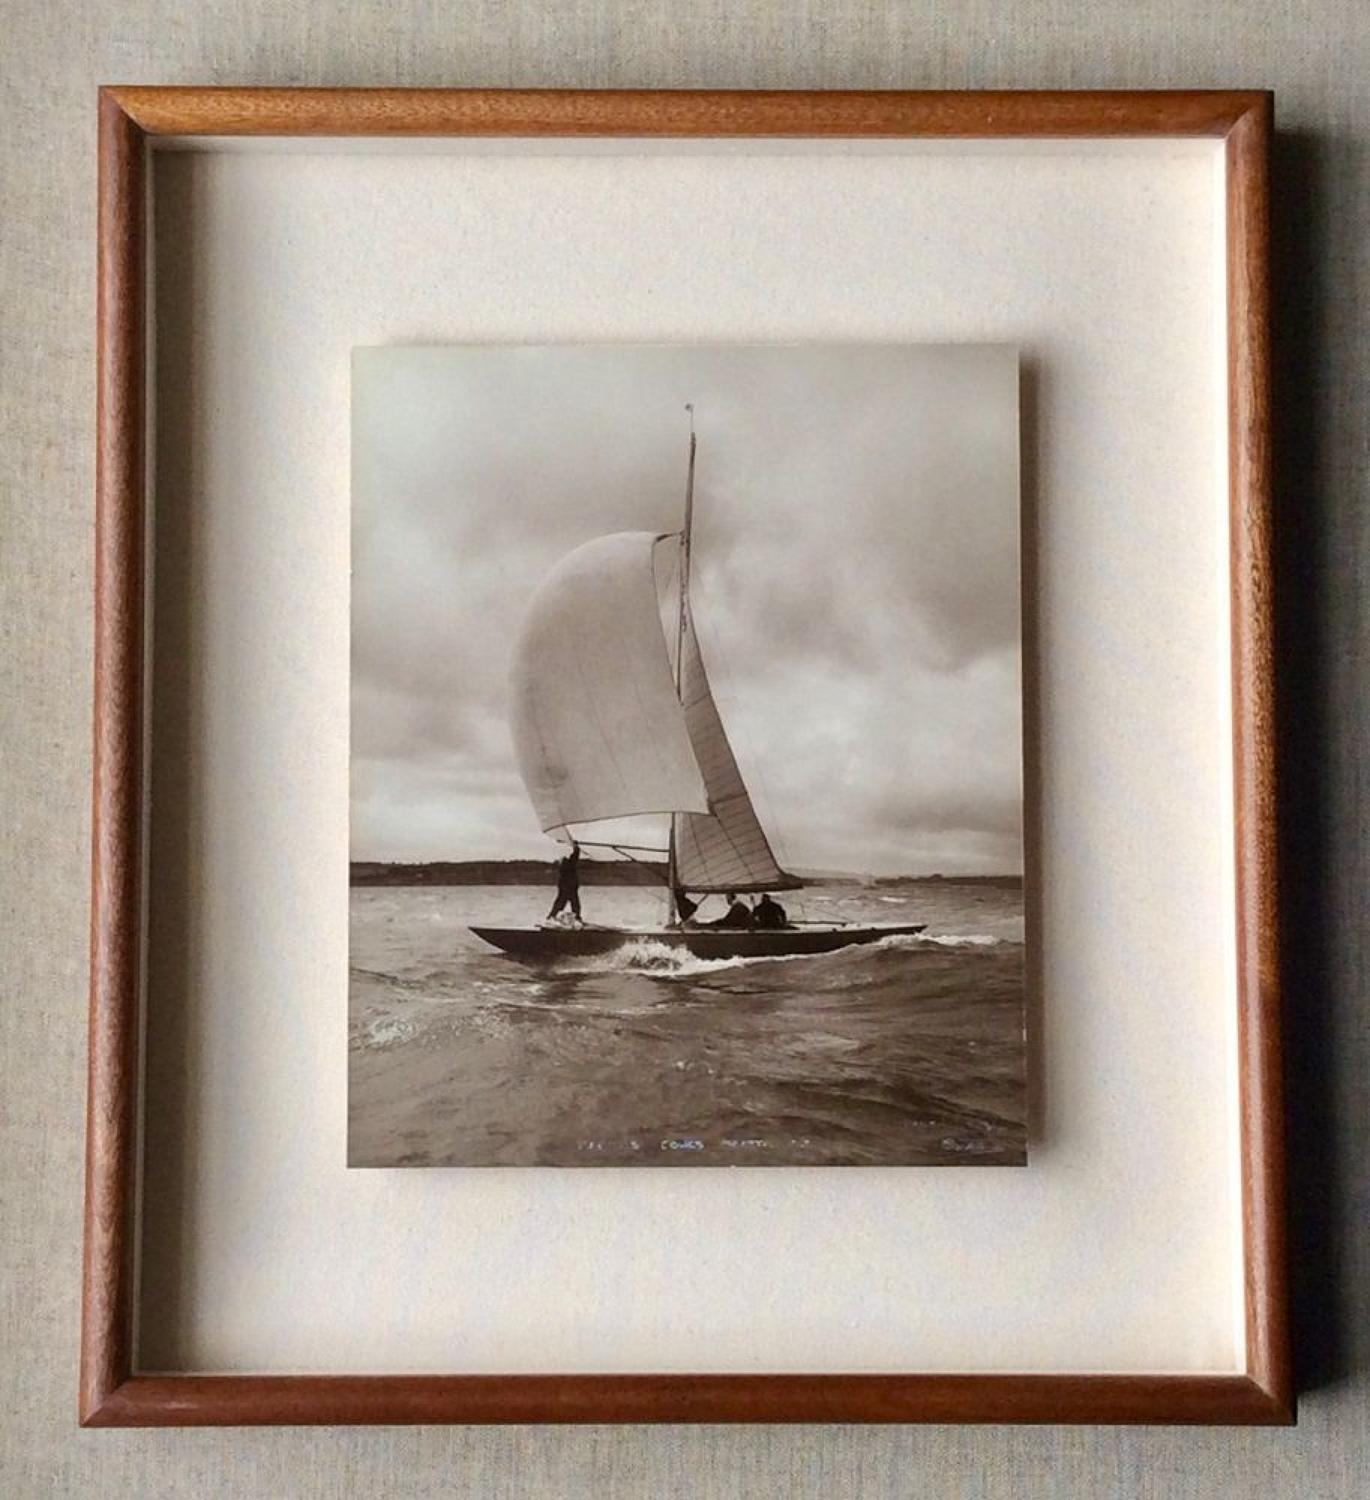 Beken of Cowes   ~   1950s British photographs of yachts